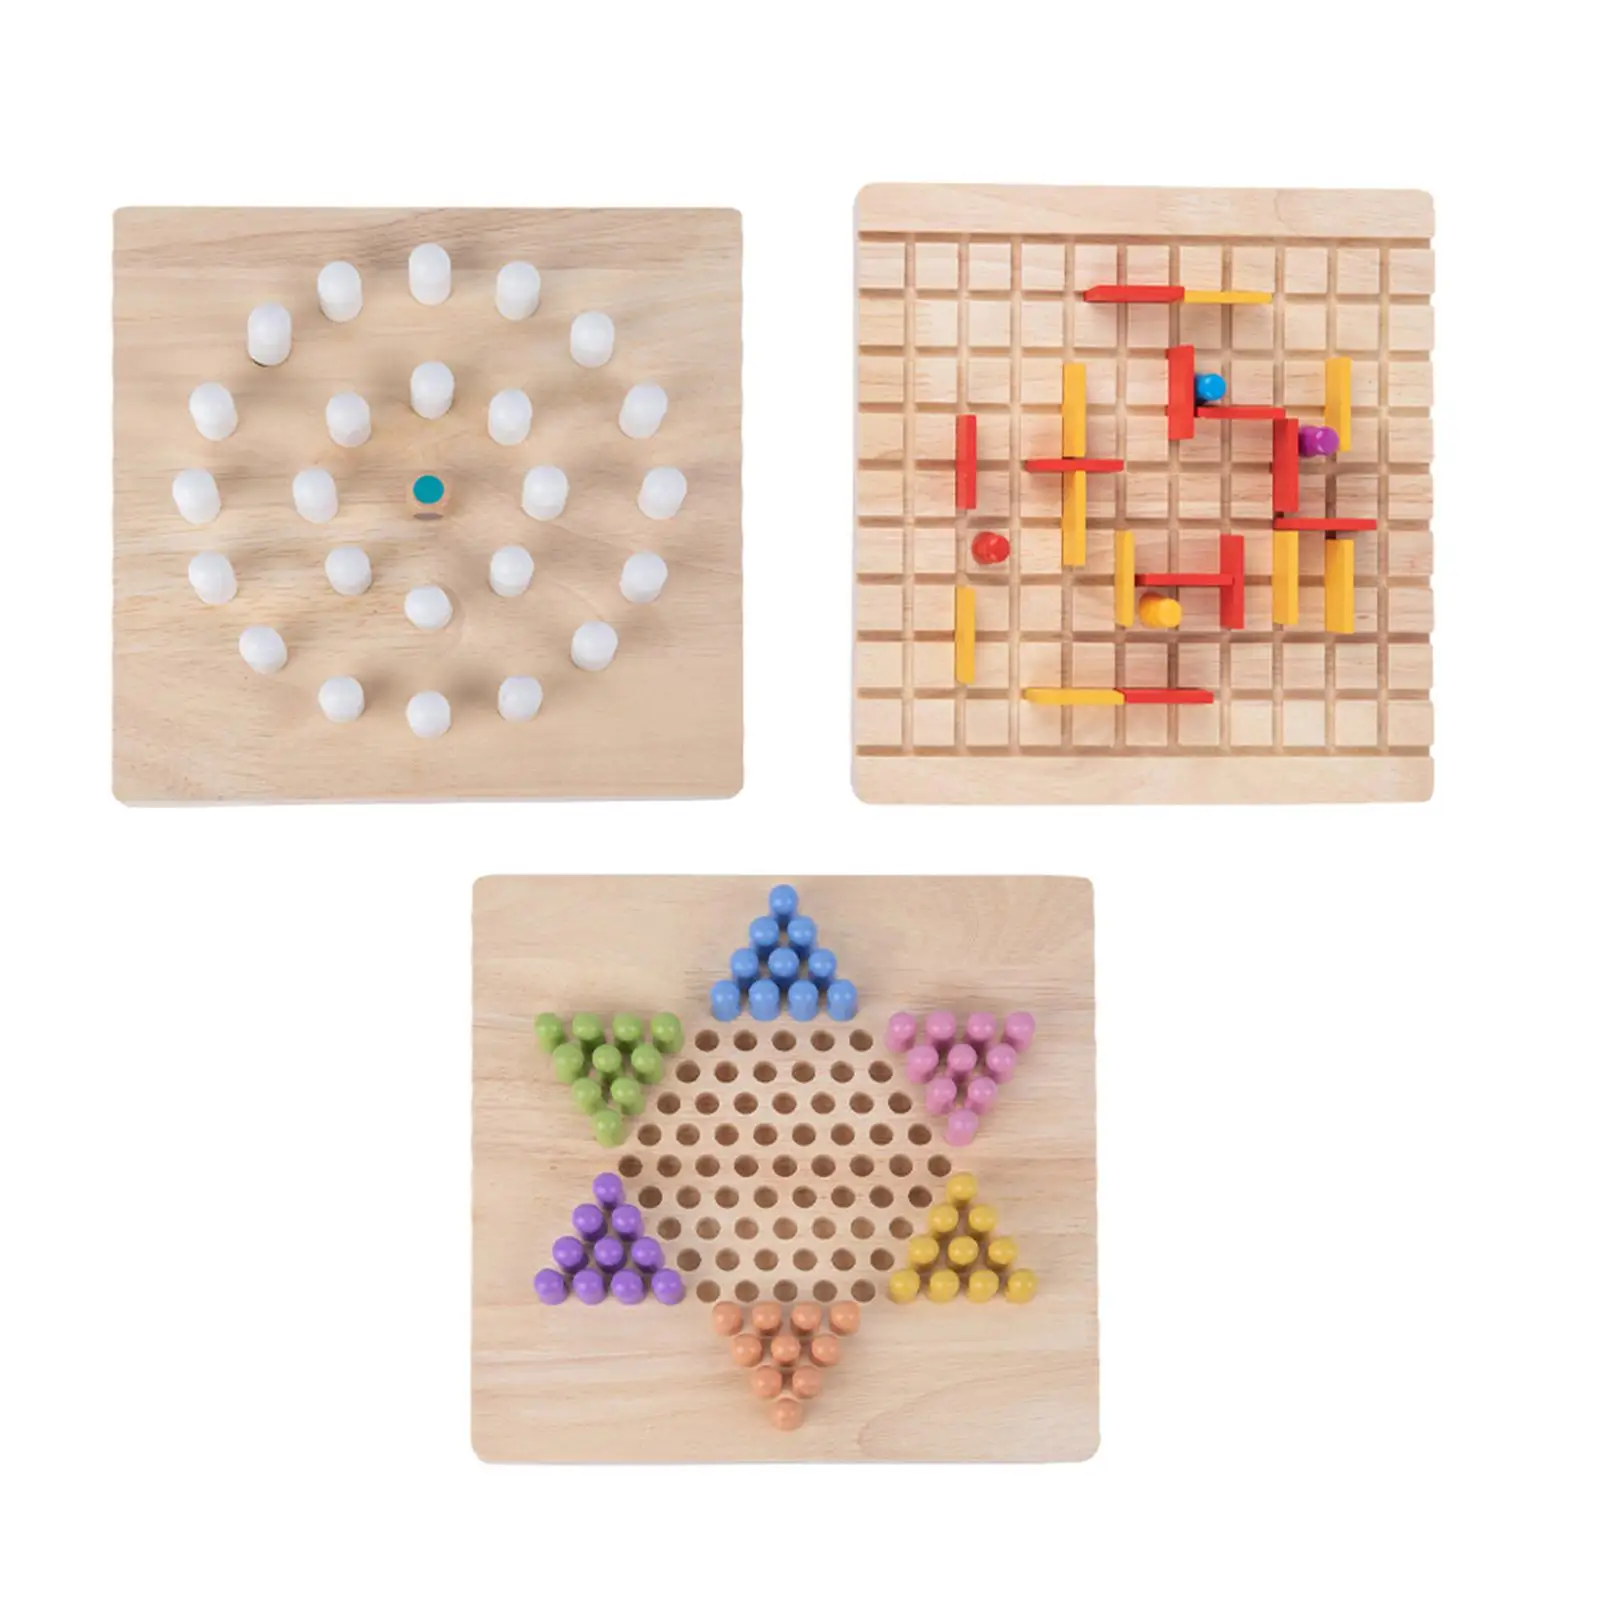 Wooden Board Game Pegs Set Collection Classic Strategy Game for Hand Eye Coordination Birthday Leisure Activity Preschool